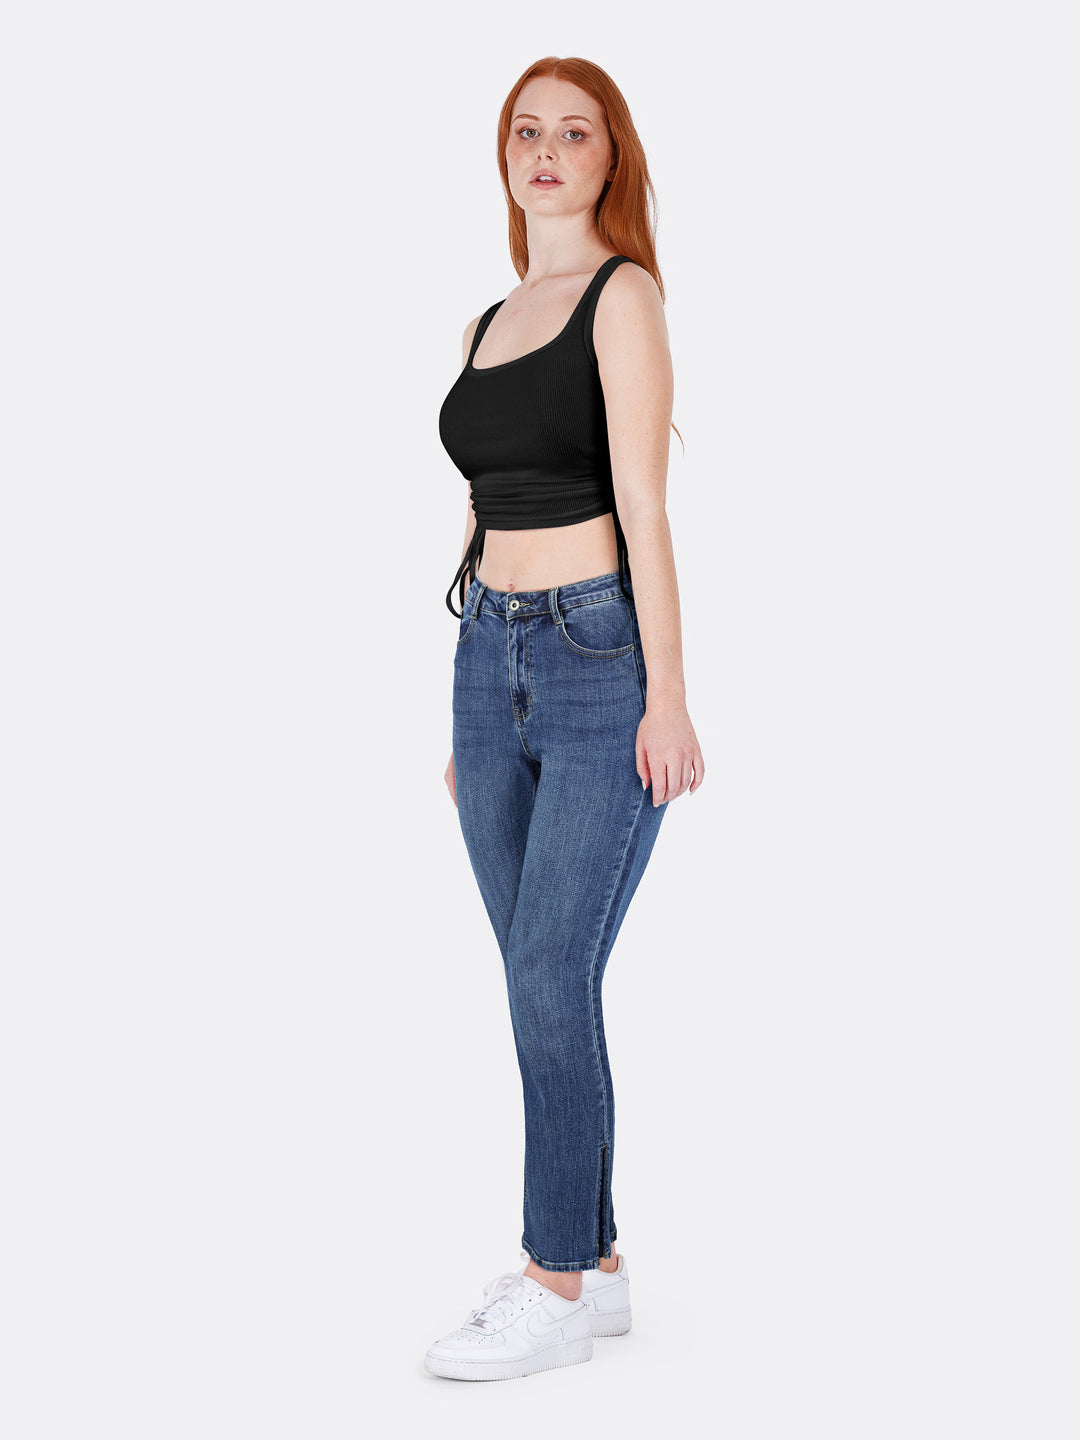 Strappy Top with Gathered Sides Black Side | Jolovies